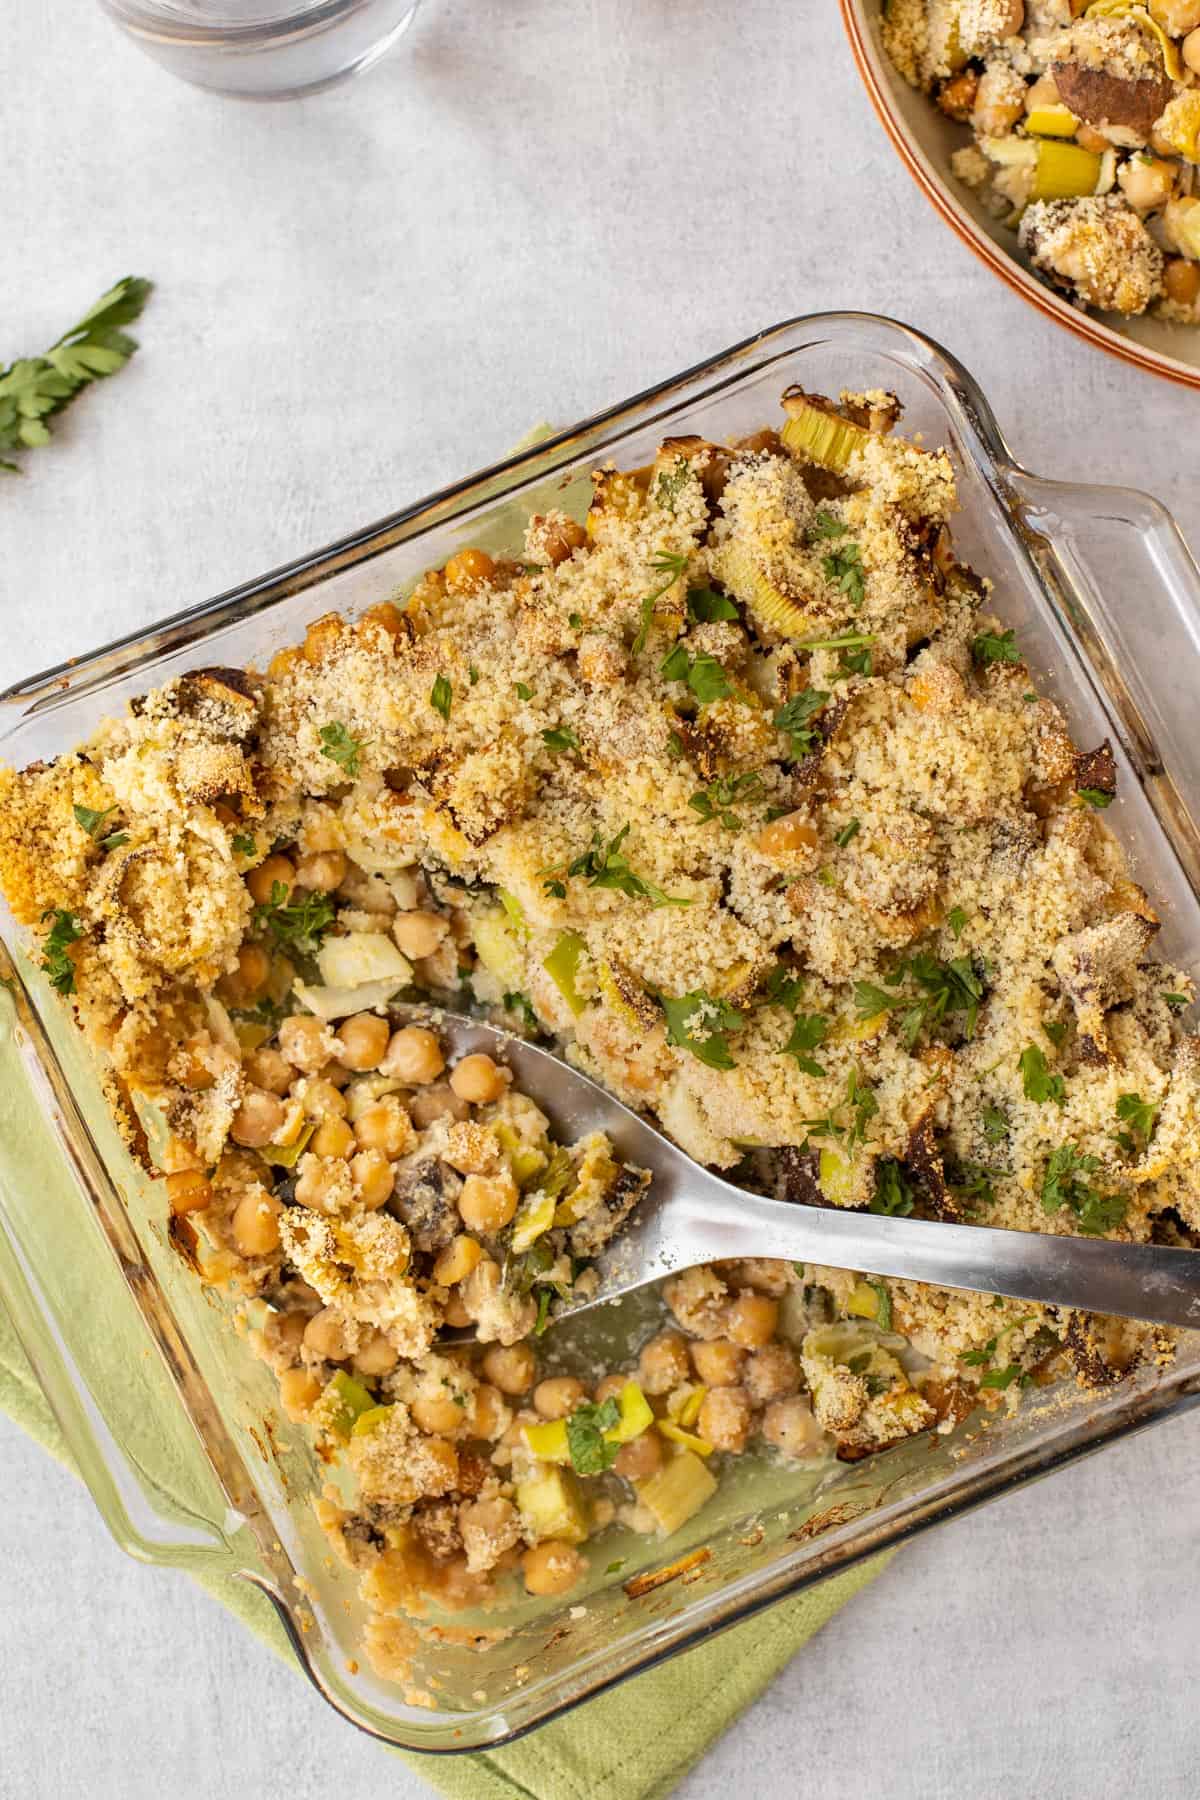 Lemony chickpea casserole in a baking dish with a scoop removed.